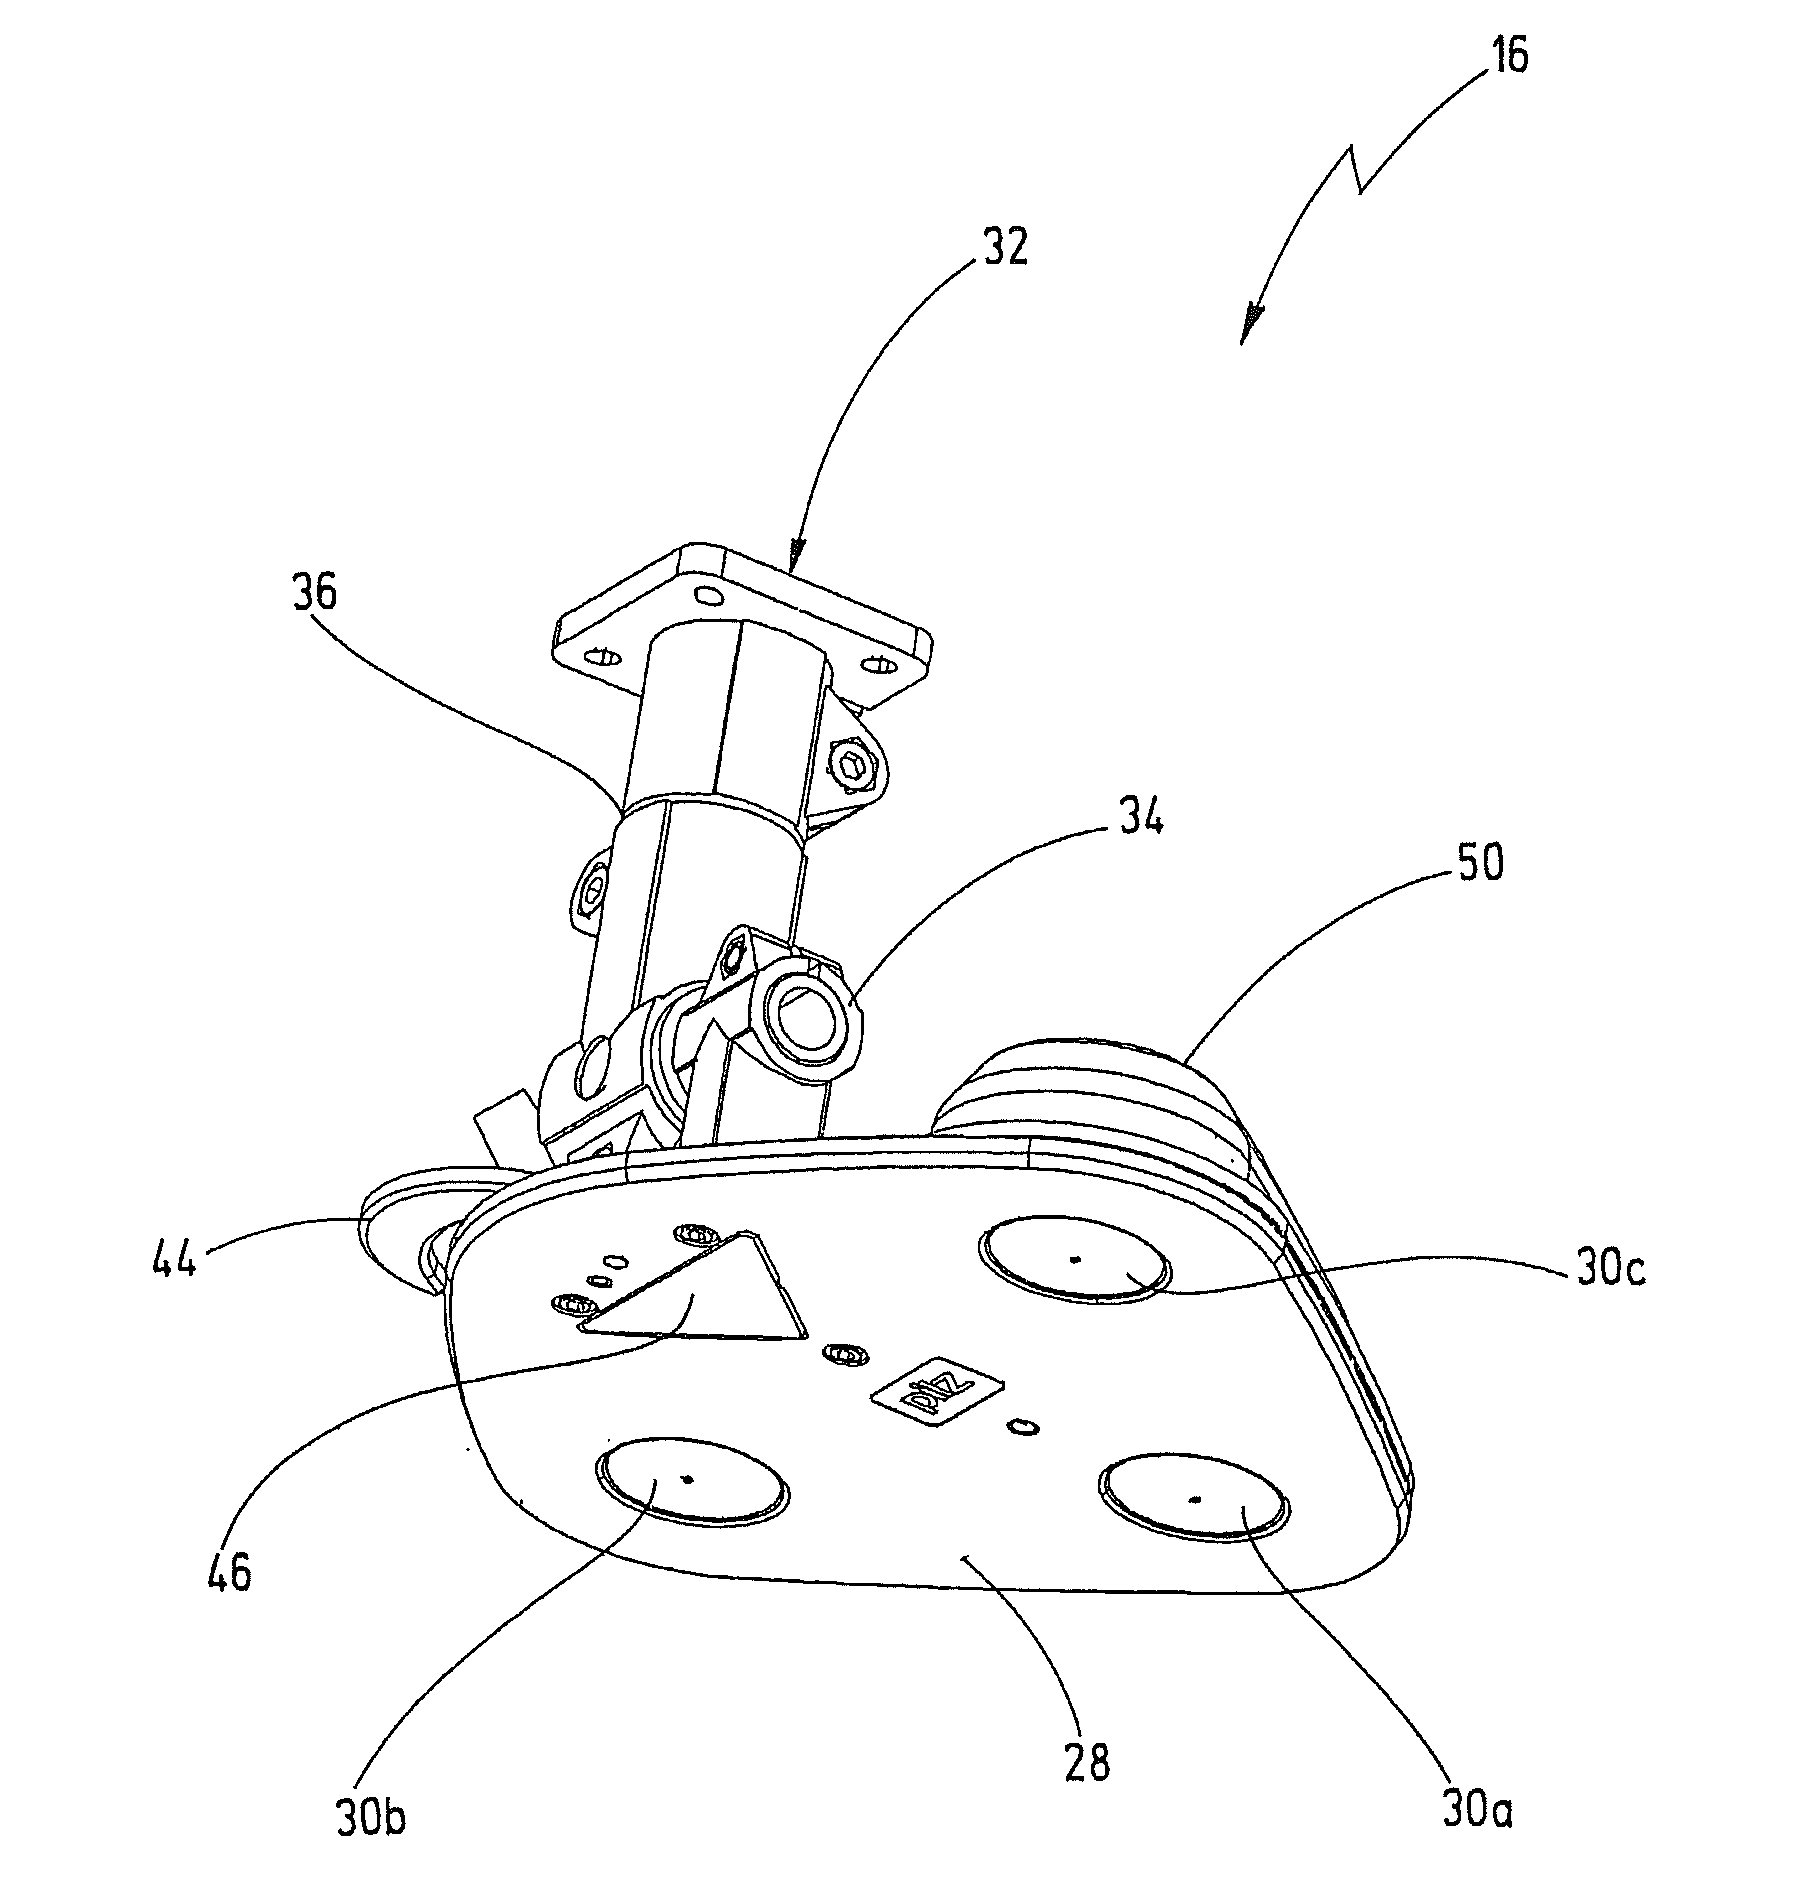 Camera system for monitoring a space area